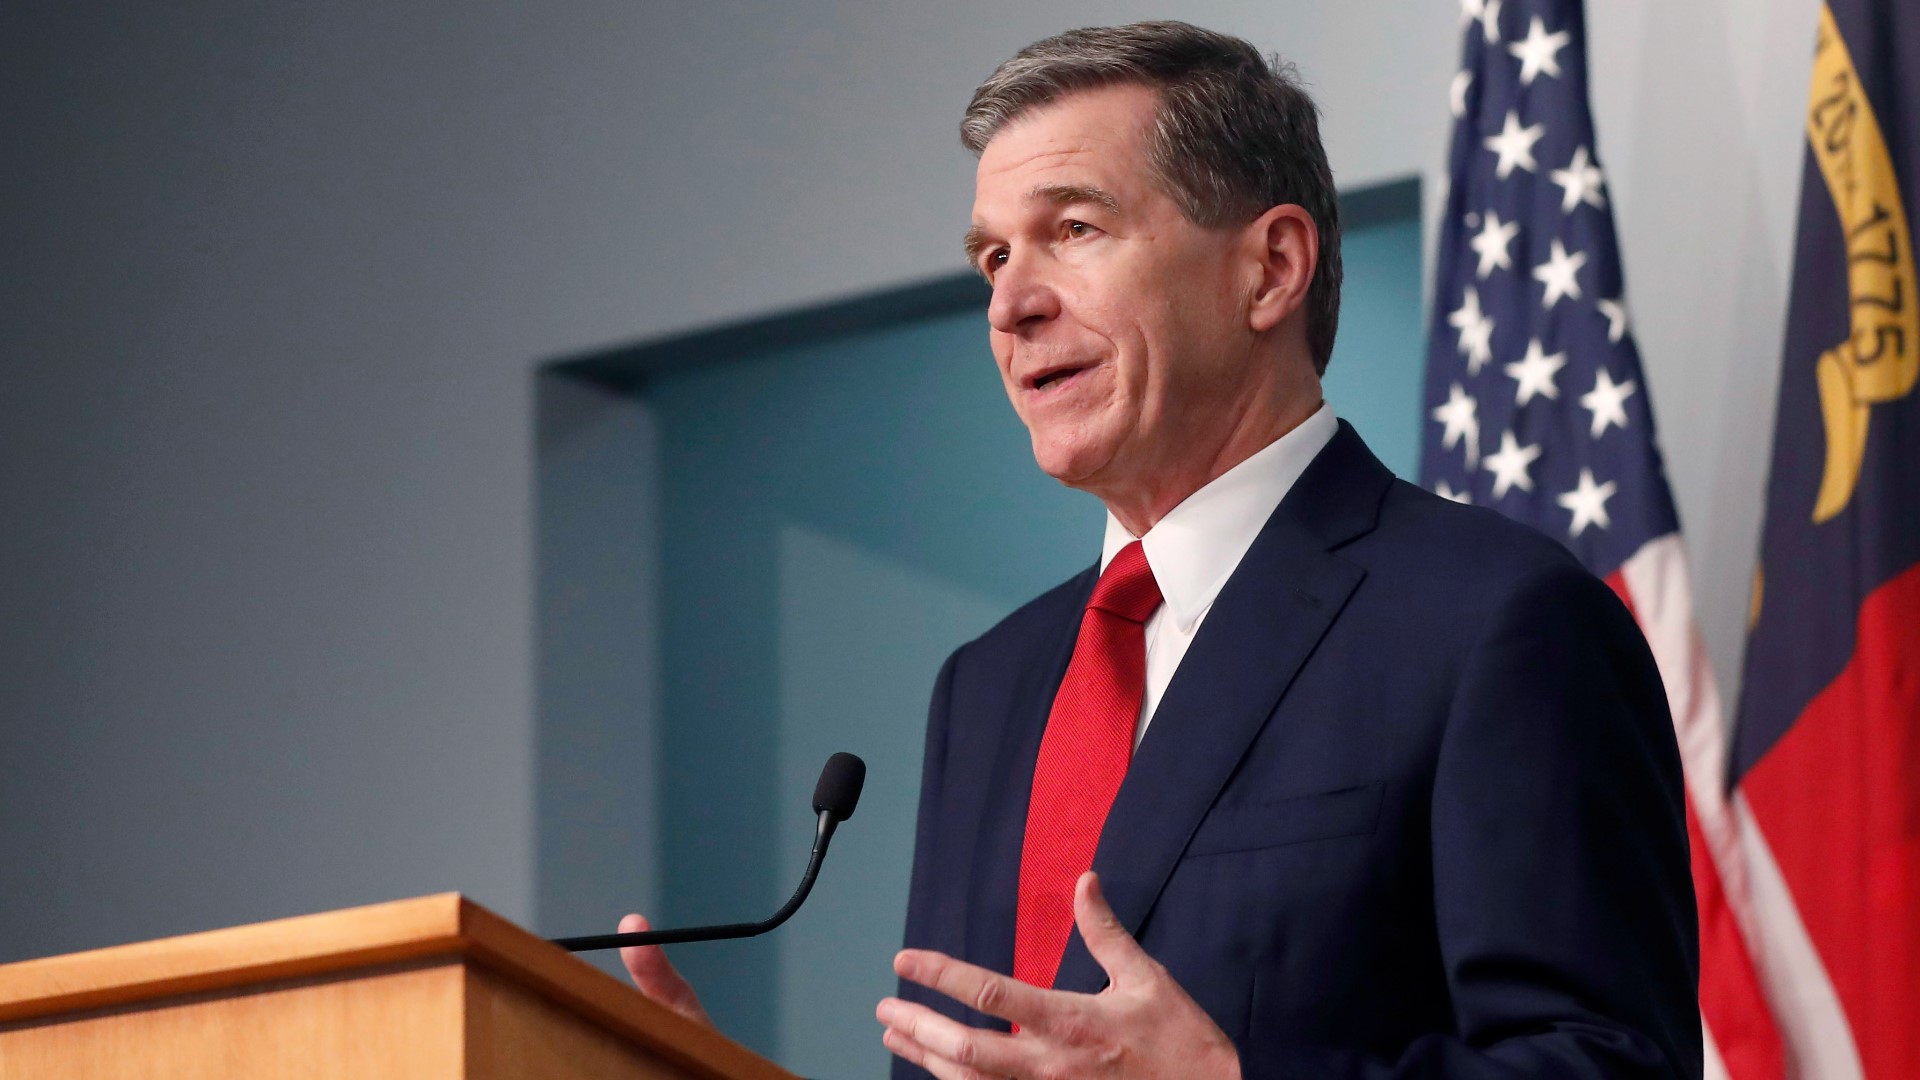 North Carolina Gov. Roy Cooper said Tuesday that he will sign the budget proposal presented to him by top Republican lawmakers after lengthy negotiations.